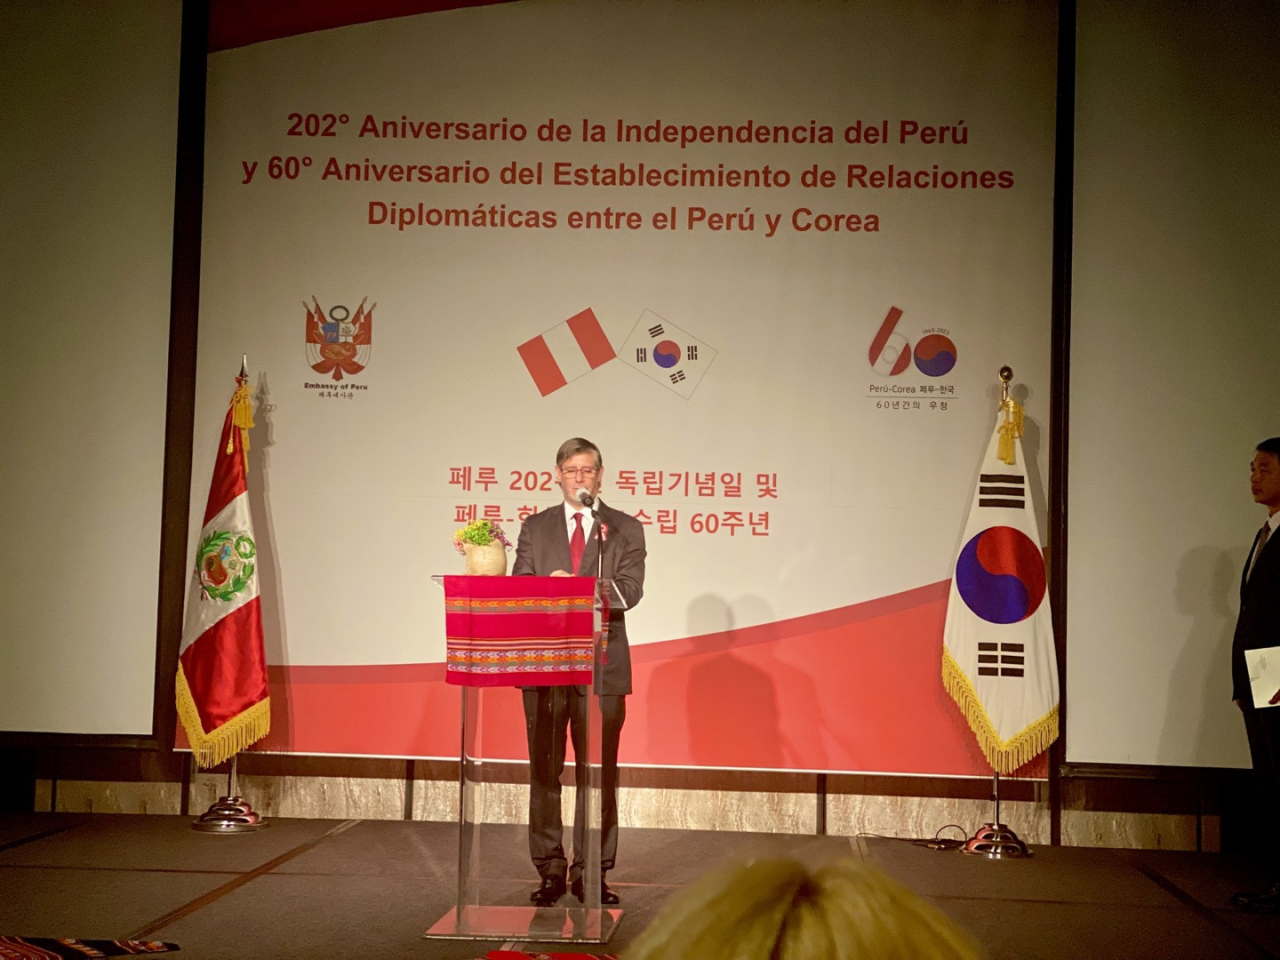 Peruvian Ambassador Paul Duclos speaks during a Peru Independence Day ceremony in Korea at the Four Seasons Hotel in Seoul on Thursday. (Sanjay Kumar/The Korea Herald)